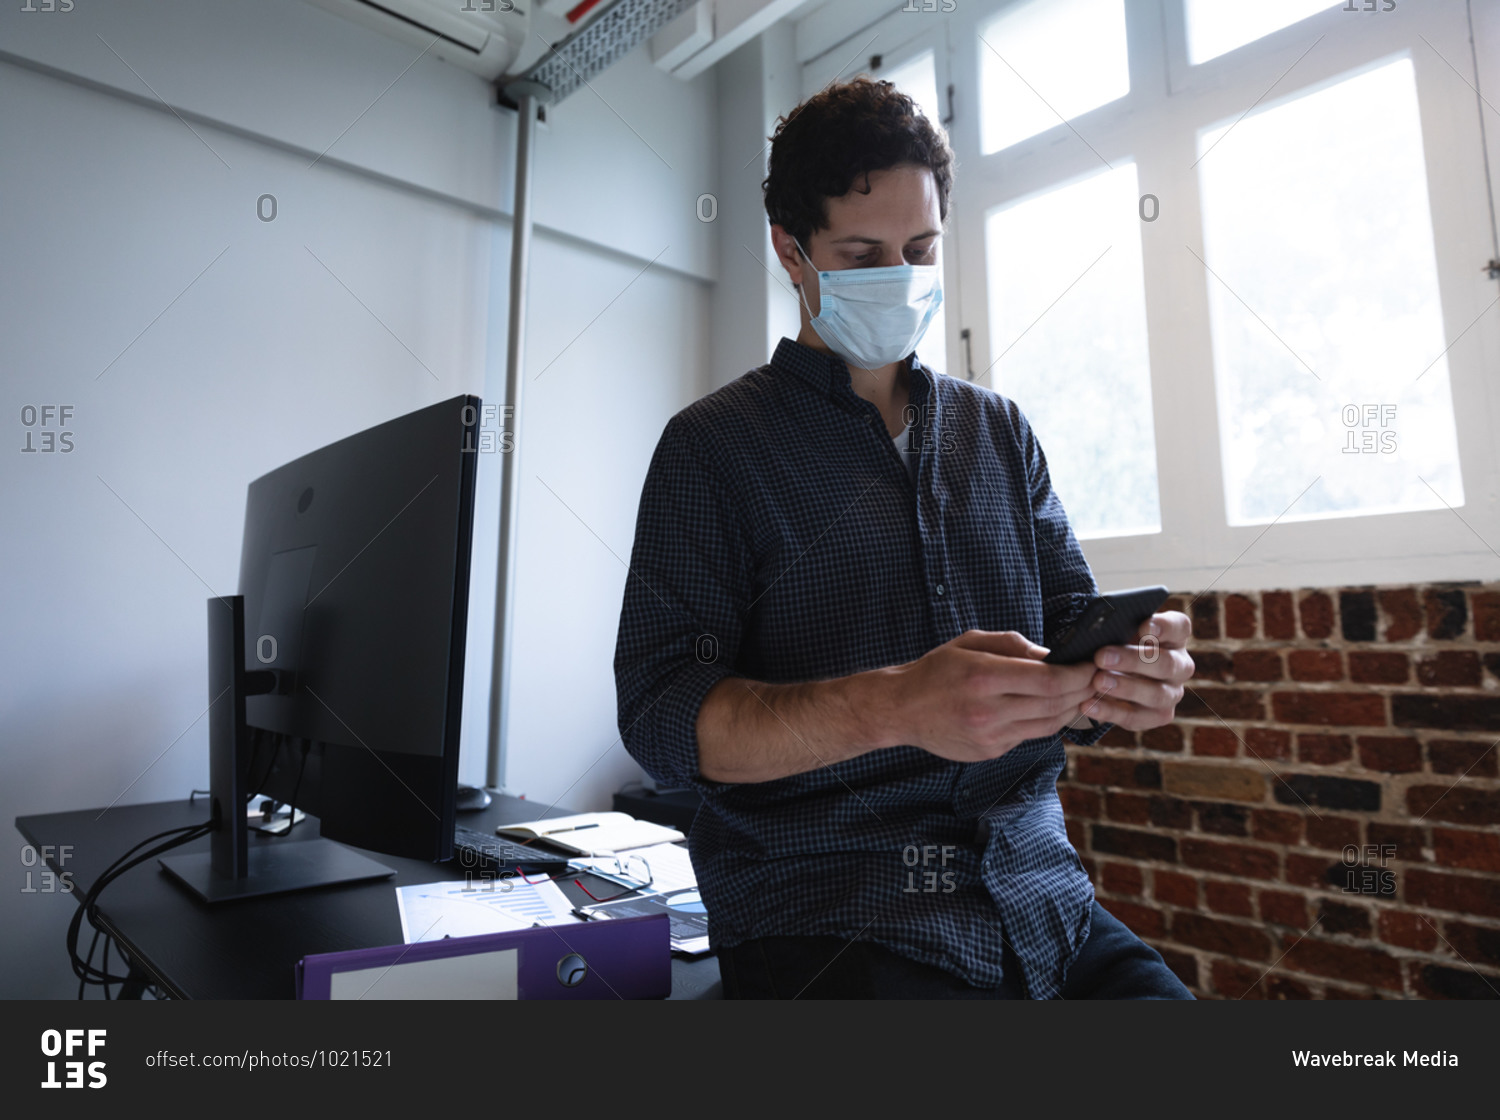 Caucasian man working in a casual office, using his smartphone and wearing face mask. Social distancing in the workplace during Coronavirus Covid 19 pandemic.